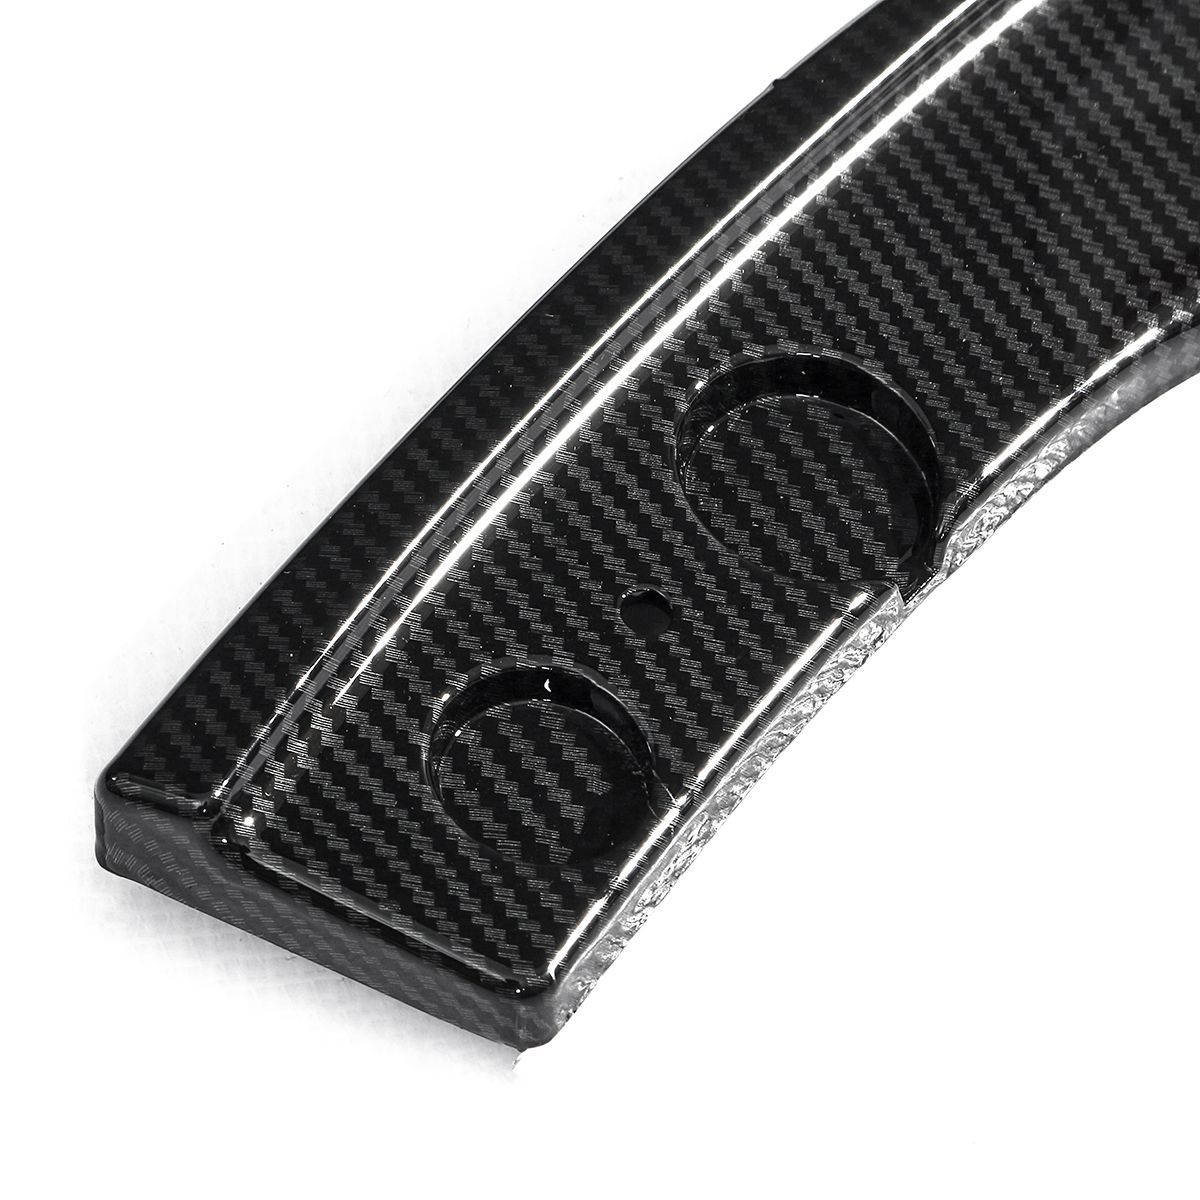 Carbon-Fiber-Front-Bumper-Protector-Cover-Splitter-Lip-For-BMW-F30-3-Series-M-Style-2012-18-1578470